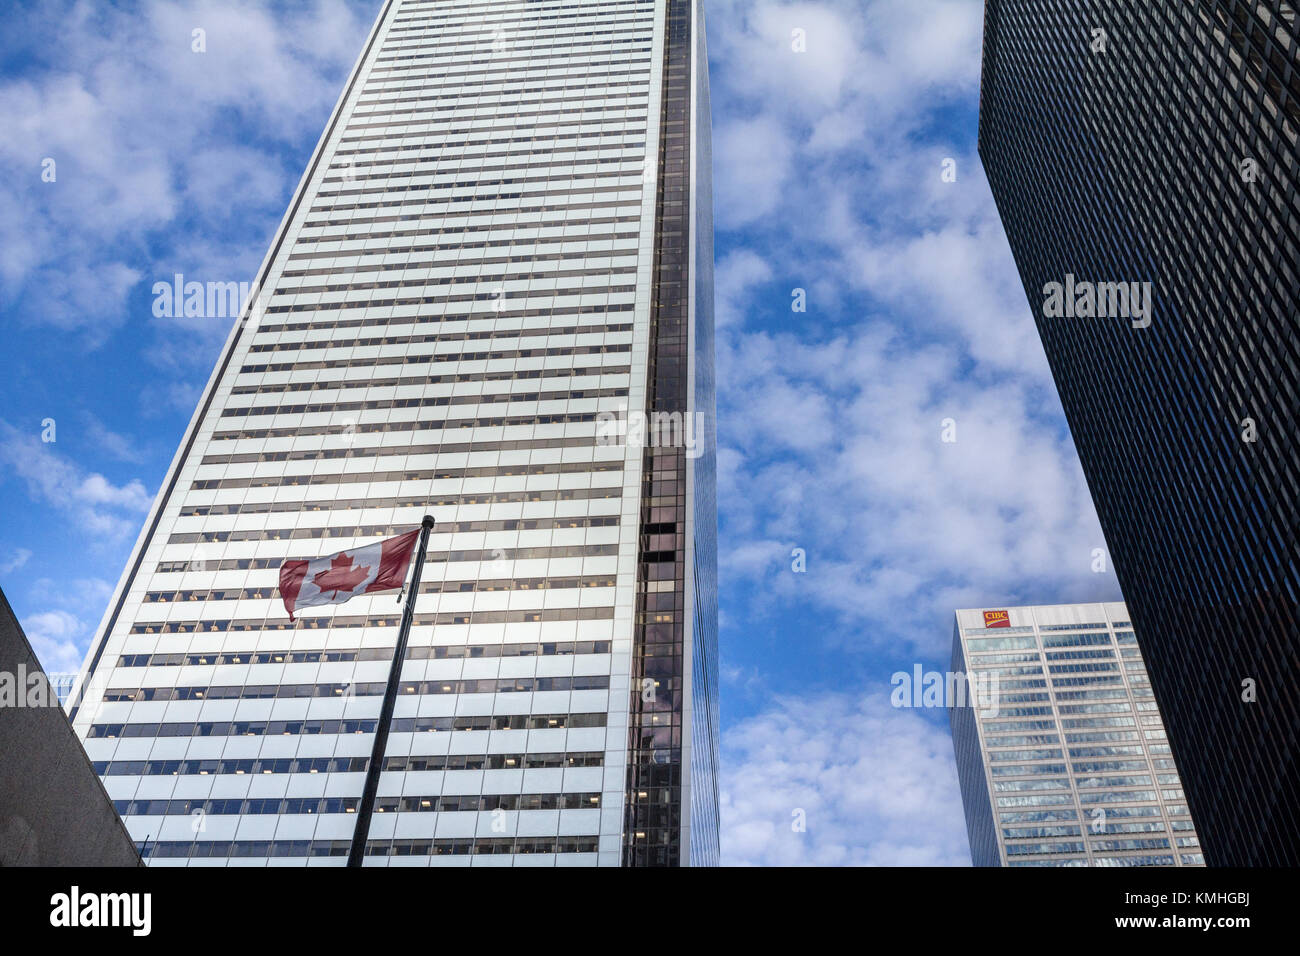 TORONTO, CANADA - DECEMBER 20, 2016: CIBC Headquarters in the center of Toronto, surrounded by skyscrapers and a Canadian flag. The Canadian Imperial  Stock Photo